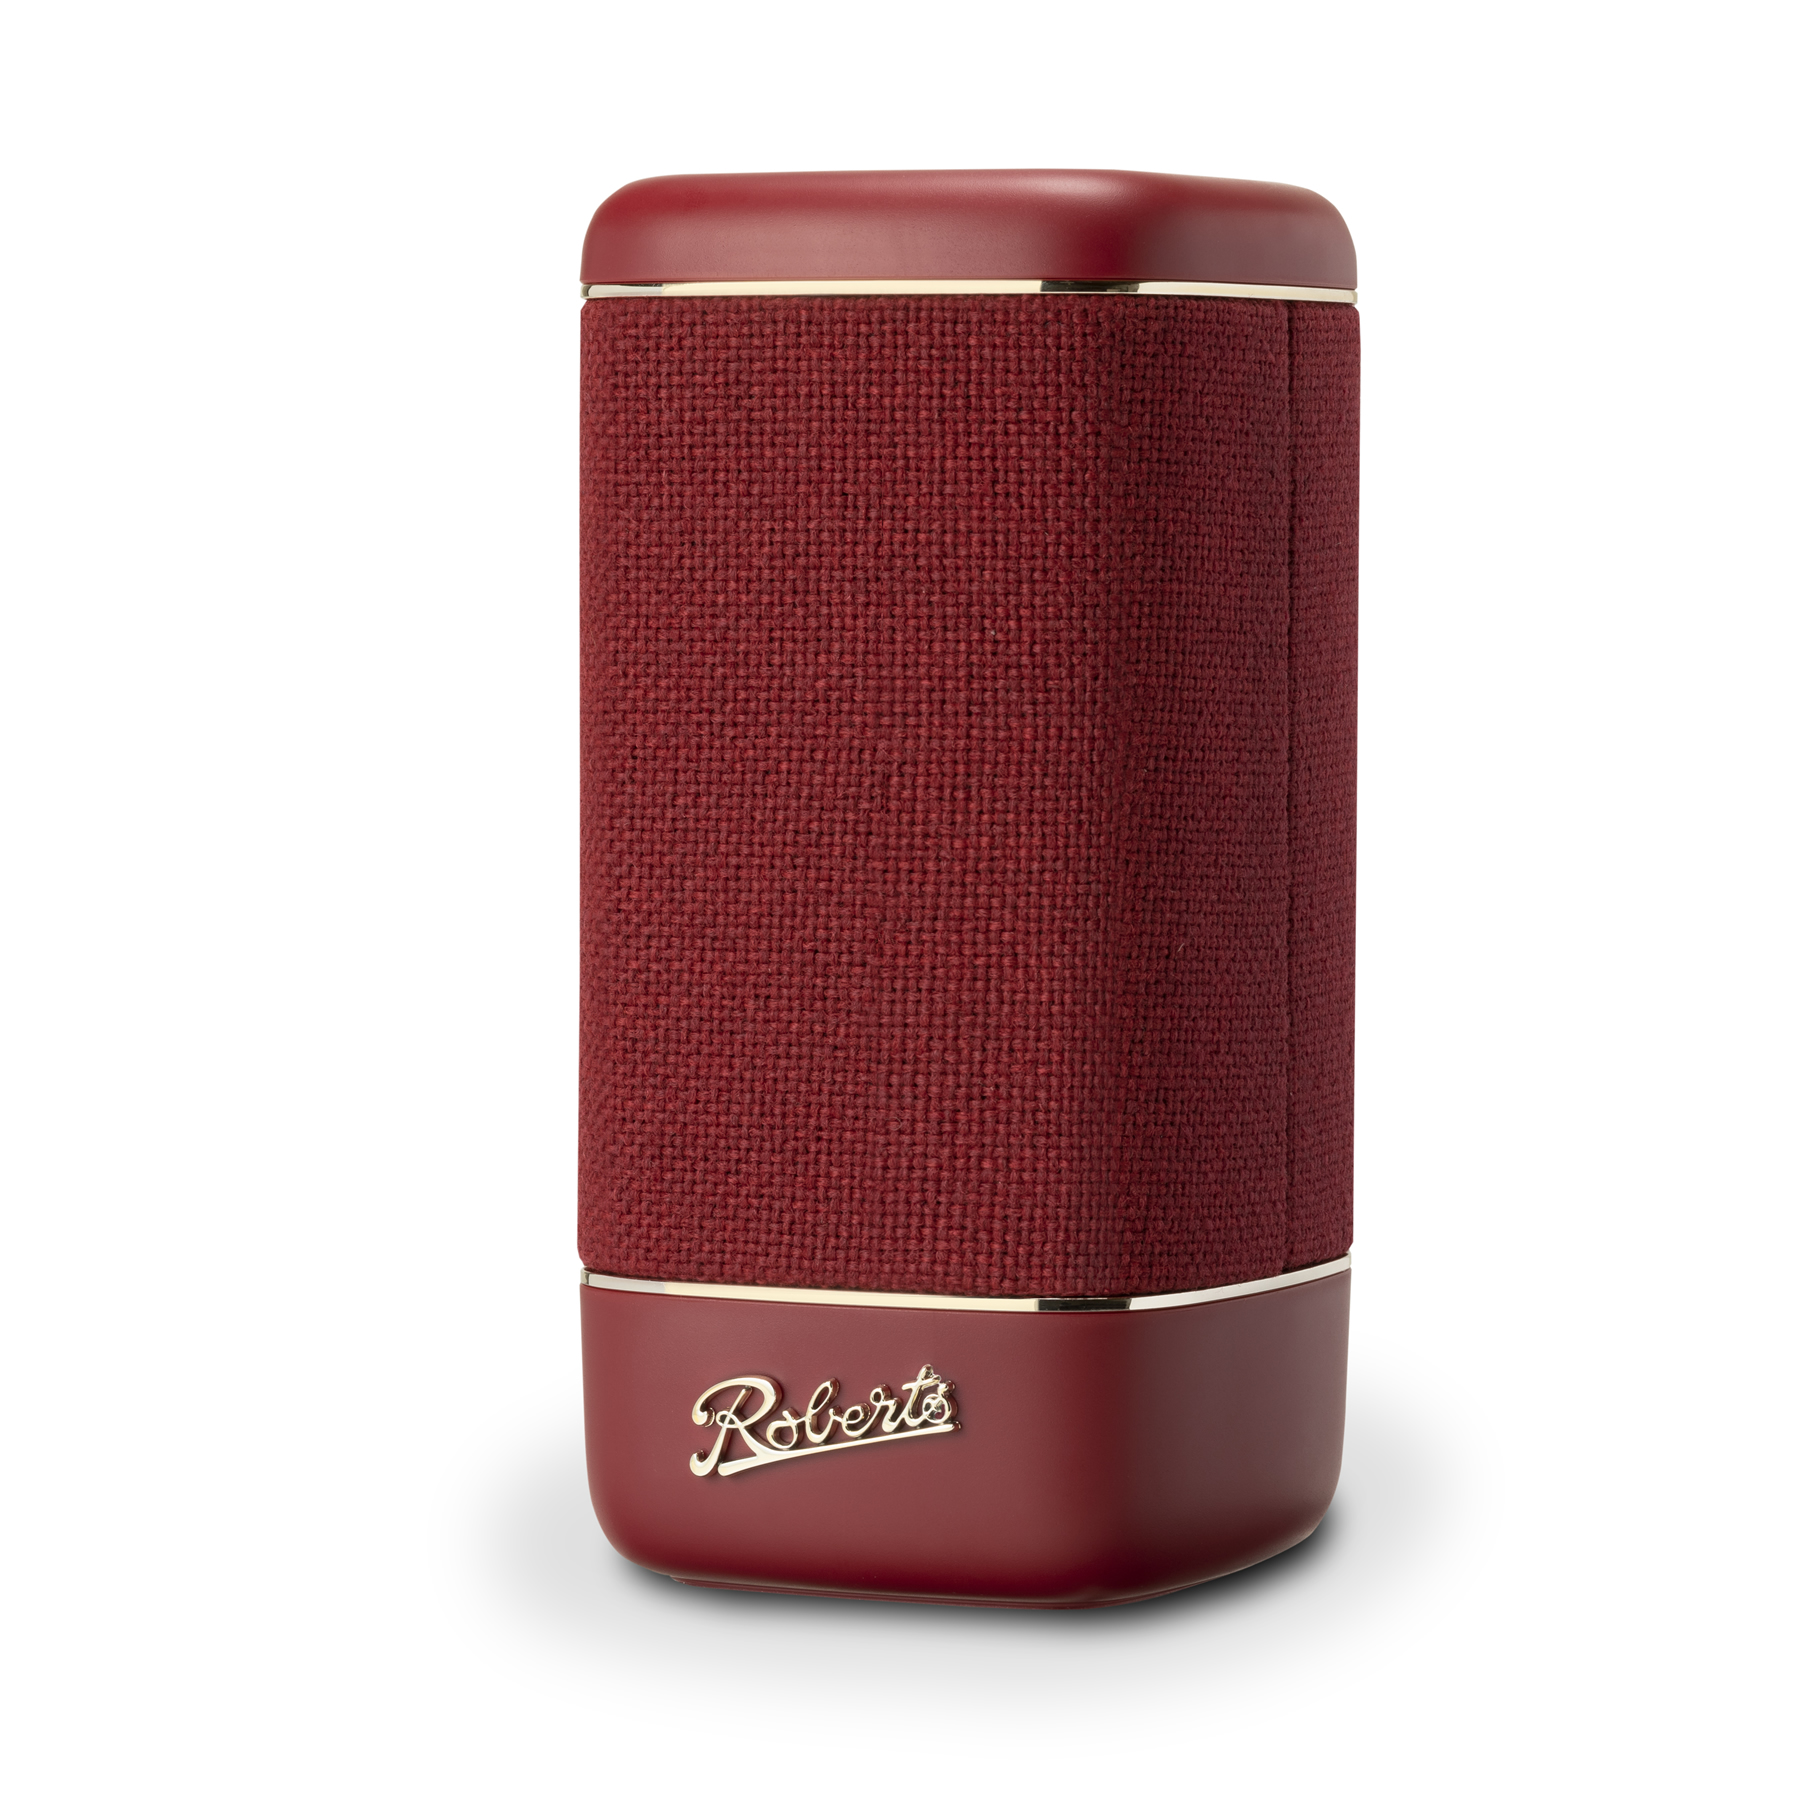 Roberts Bluetooth Speaker 15-hour Playback Berry Red